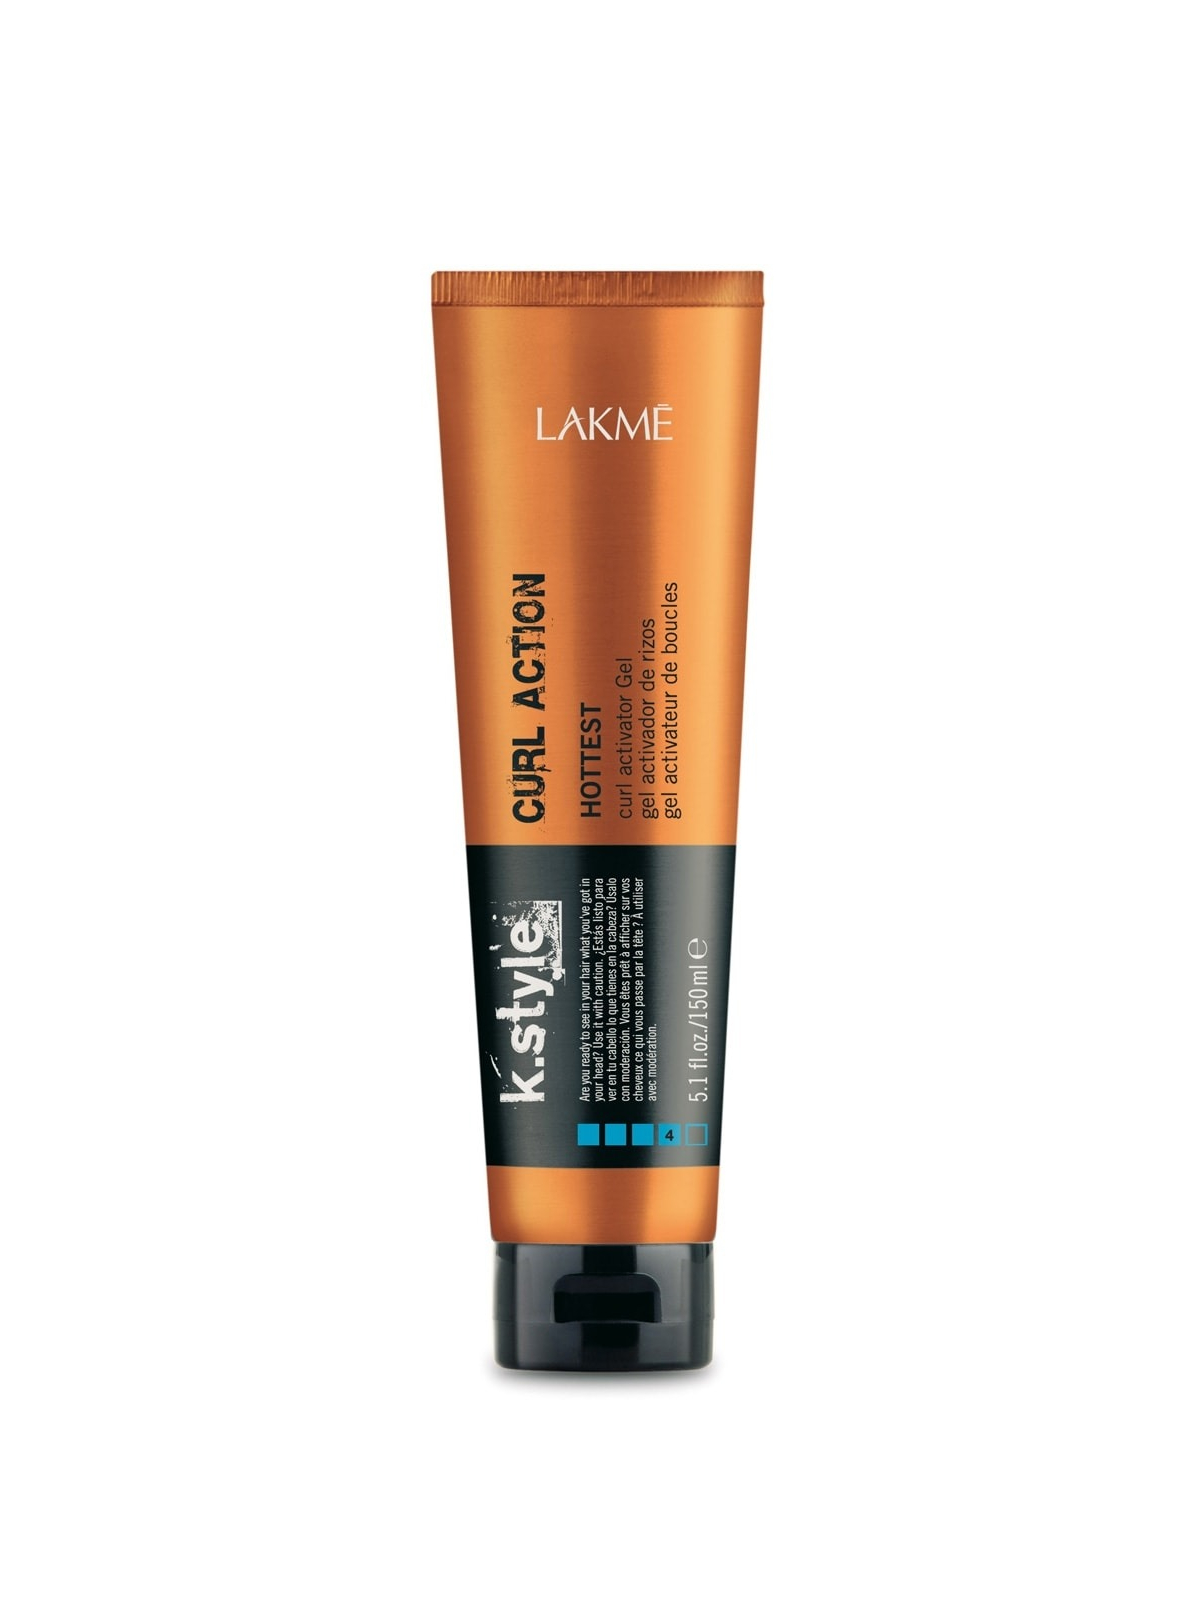 CURL ACTION CURL ACTIVATOR GEL LAKME K.STYLE